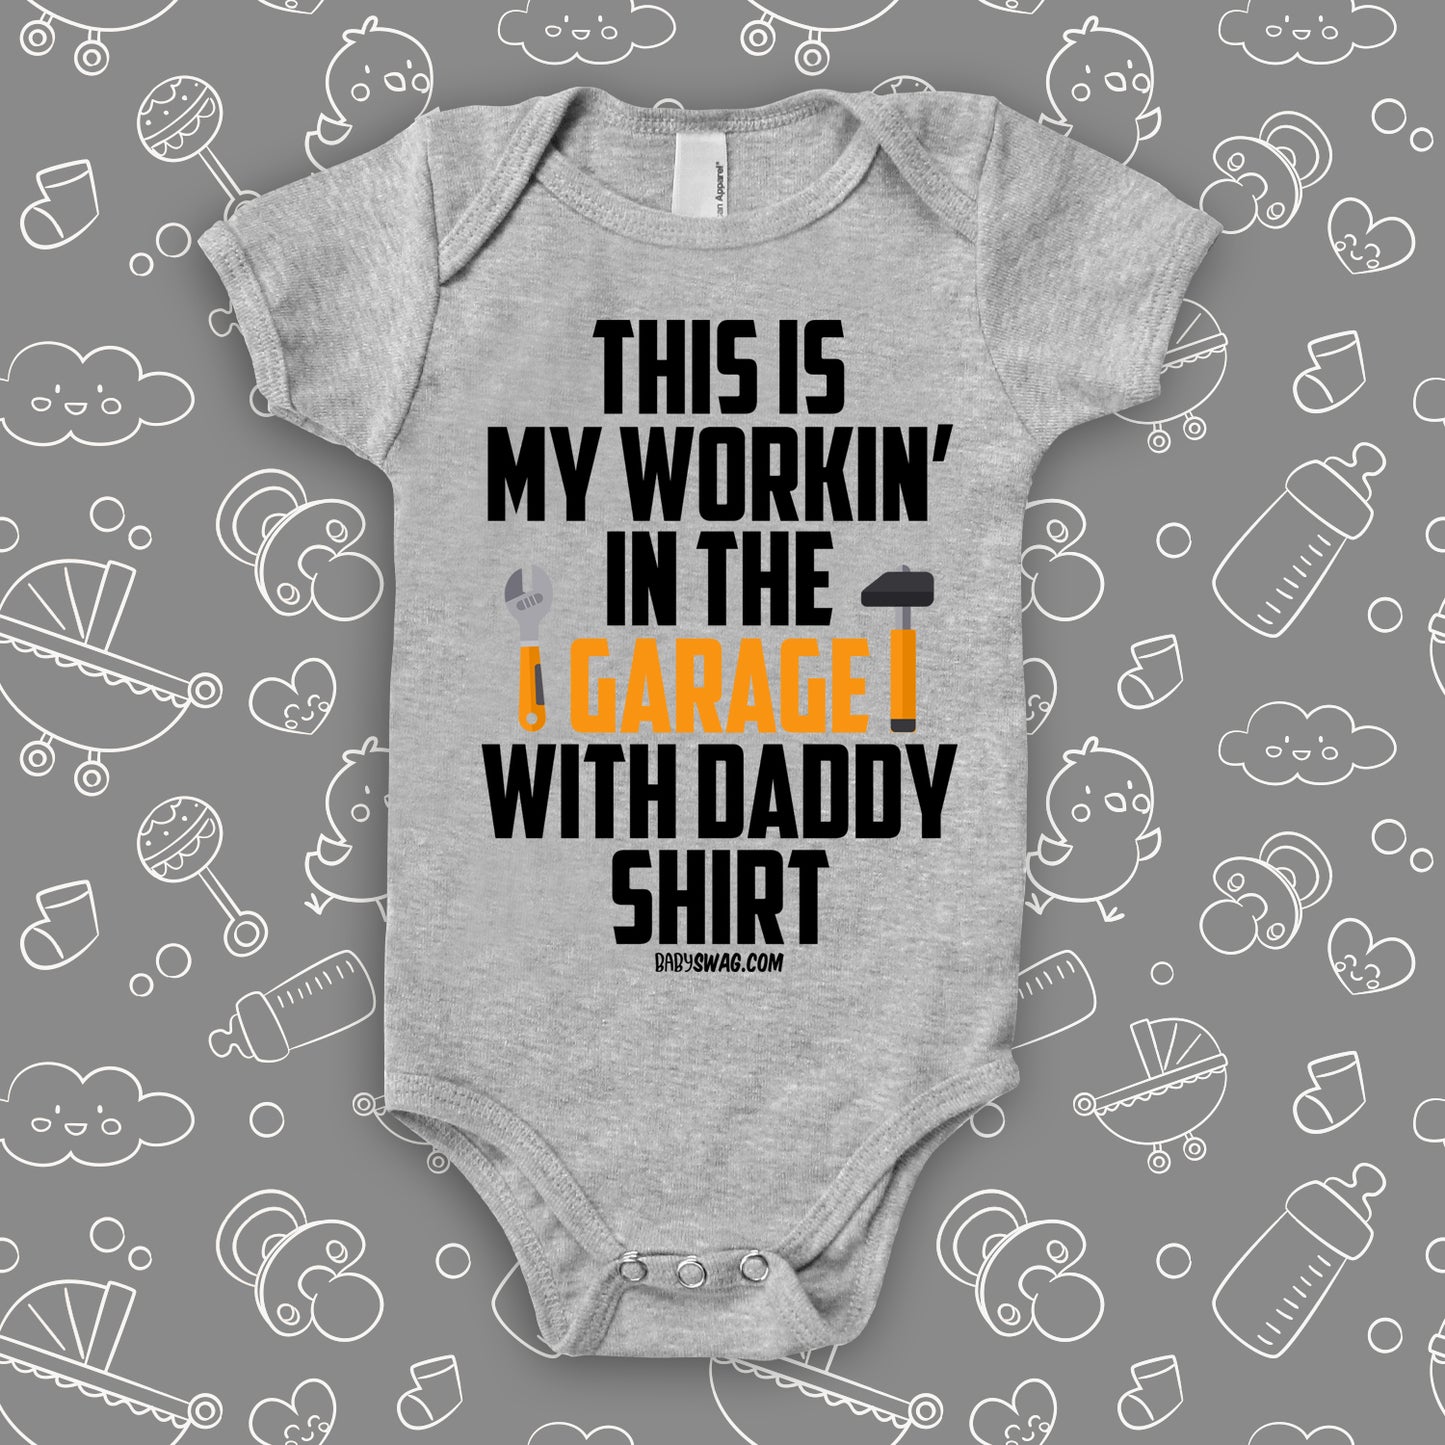 Funny baby boy oneisie saying "This Is My Workin' In The Garage With Daddy Shirt" in grey. 